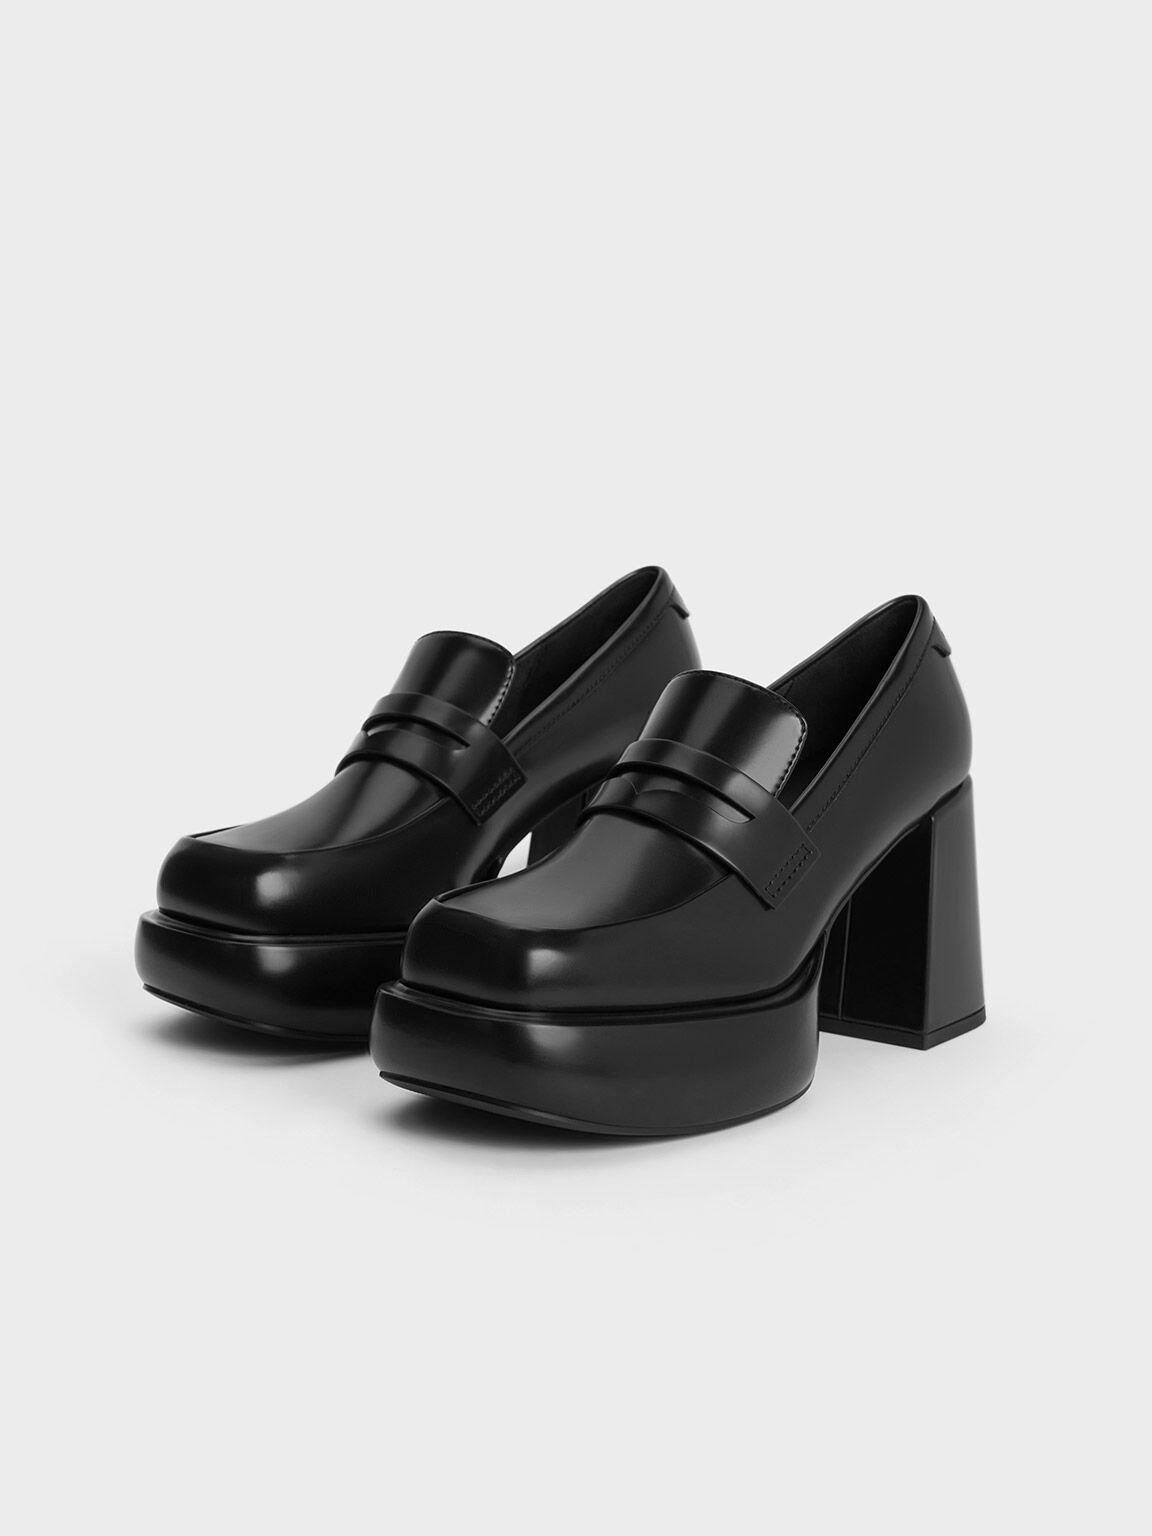 H&M Heeled Platform Loafers | Southcentre Mall